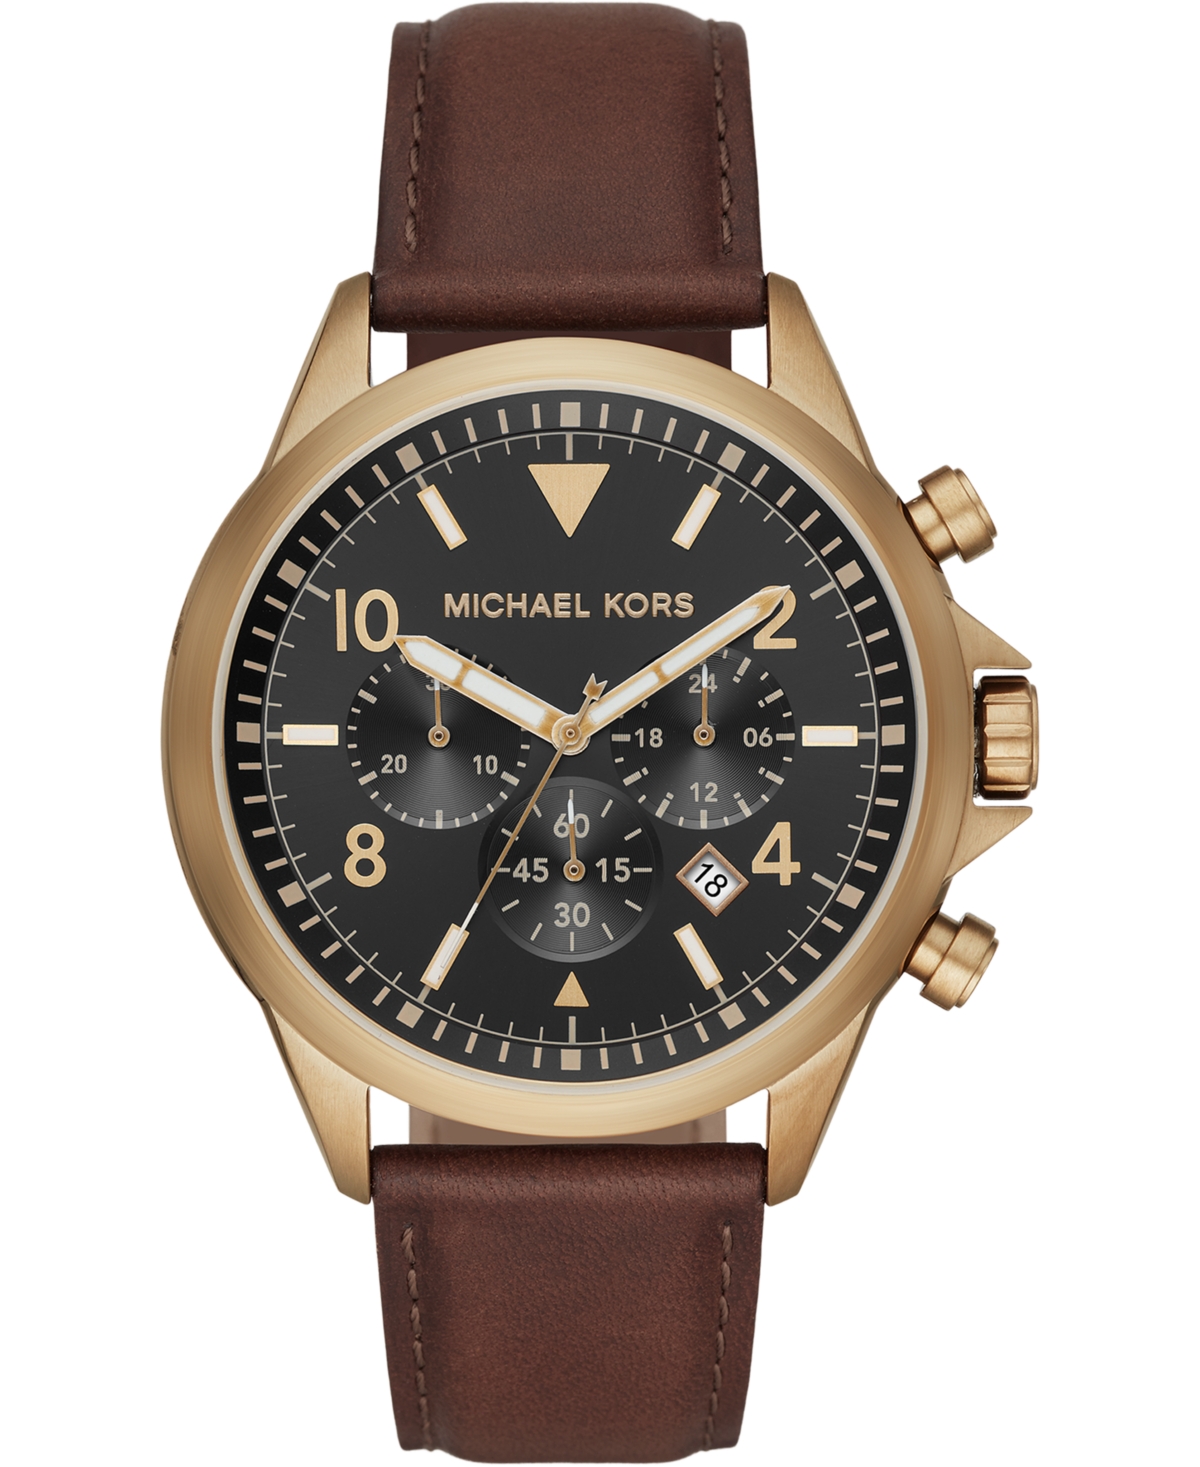 Michael Kors Men's Chronograph Gage Chocolate Leather Strap Watch 45mm &  Reviews - All Watches - Jewelry & Watches - Macy's